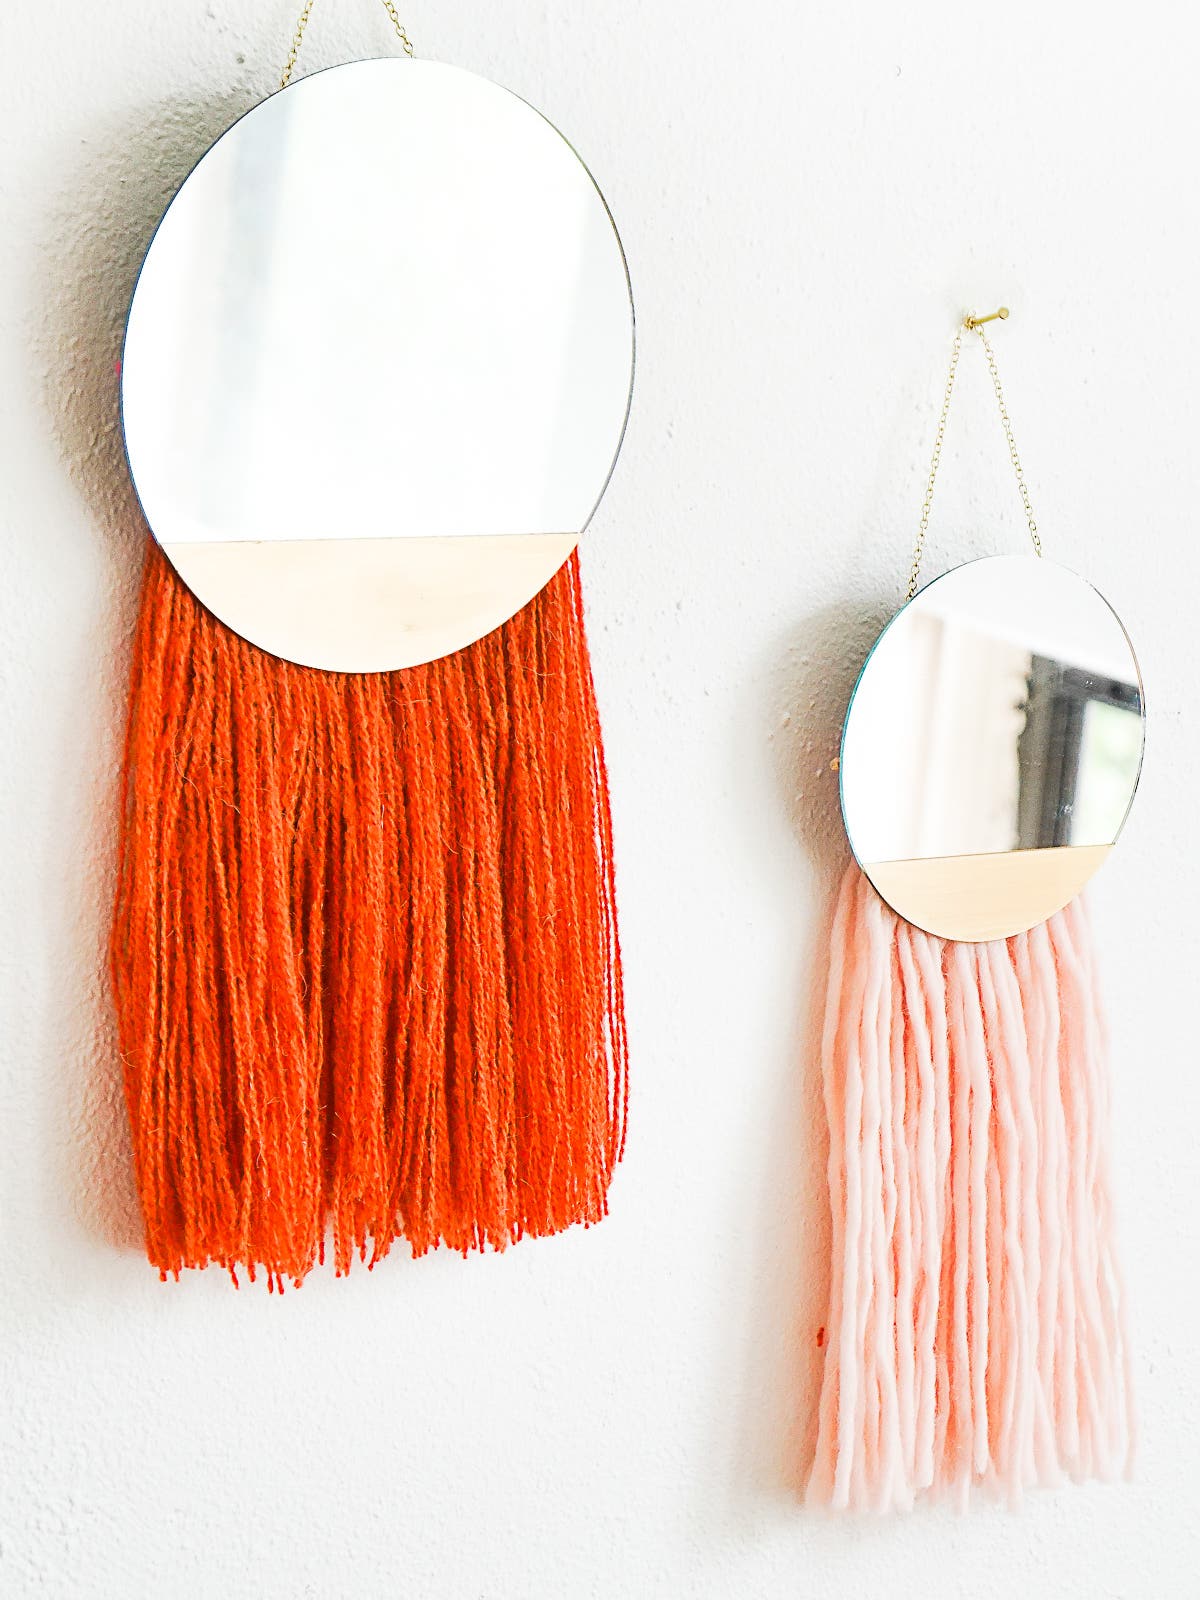 12 Insanely Easy Mirror DIYs That Will Transform Your Space